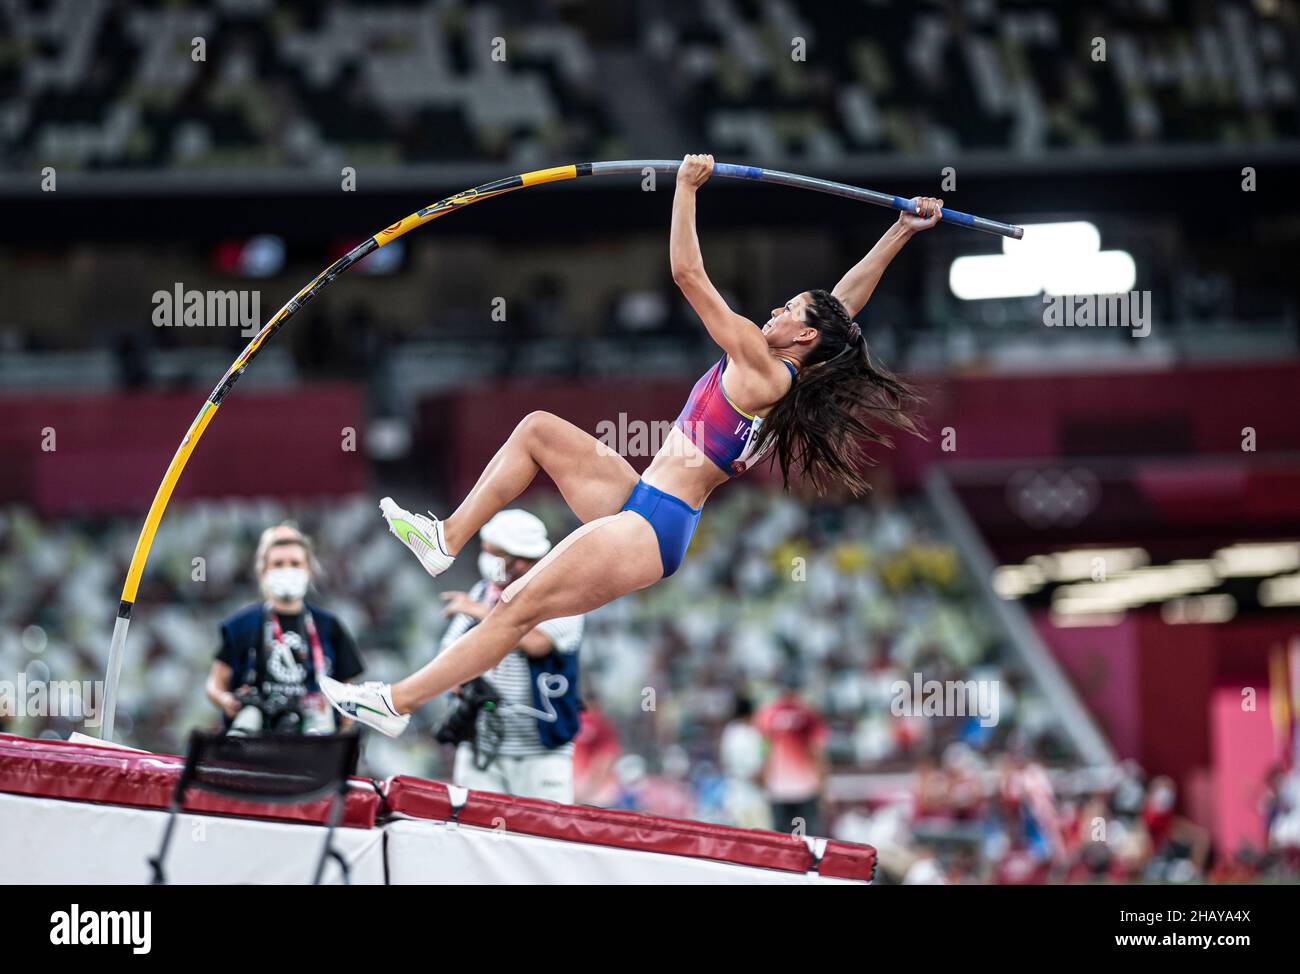 Robeilys Peinado participating in the Tokyo 2020 Olympics in the pole vault discipline. Stock Photo